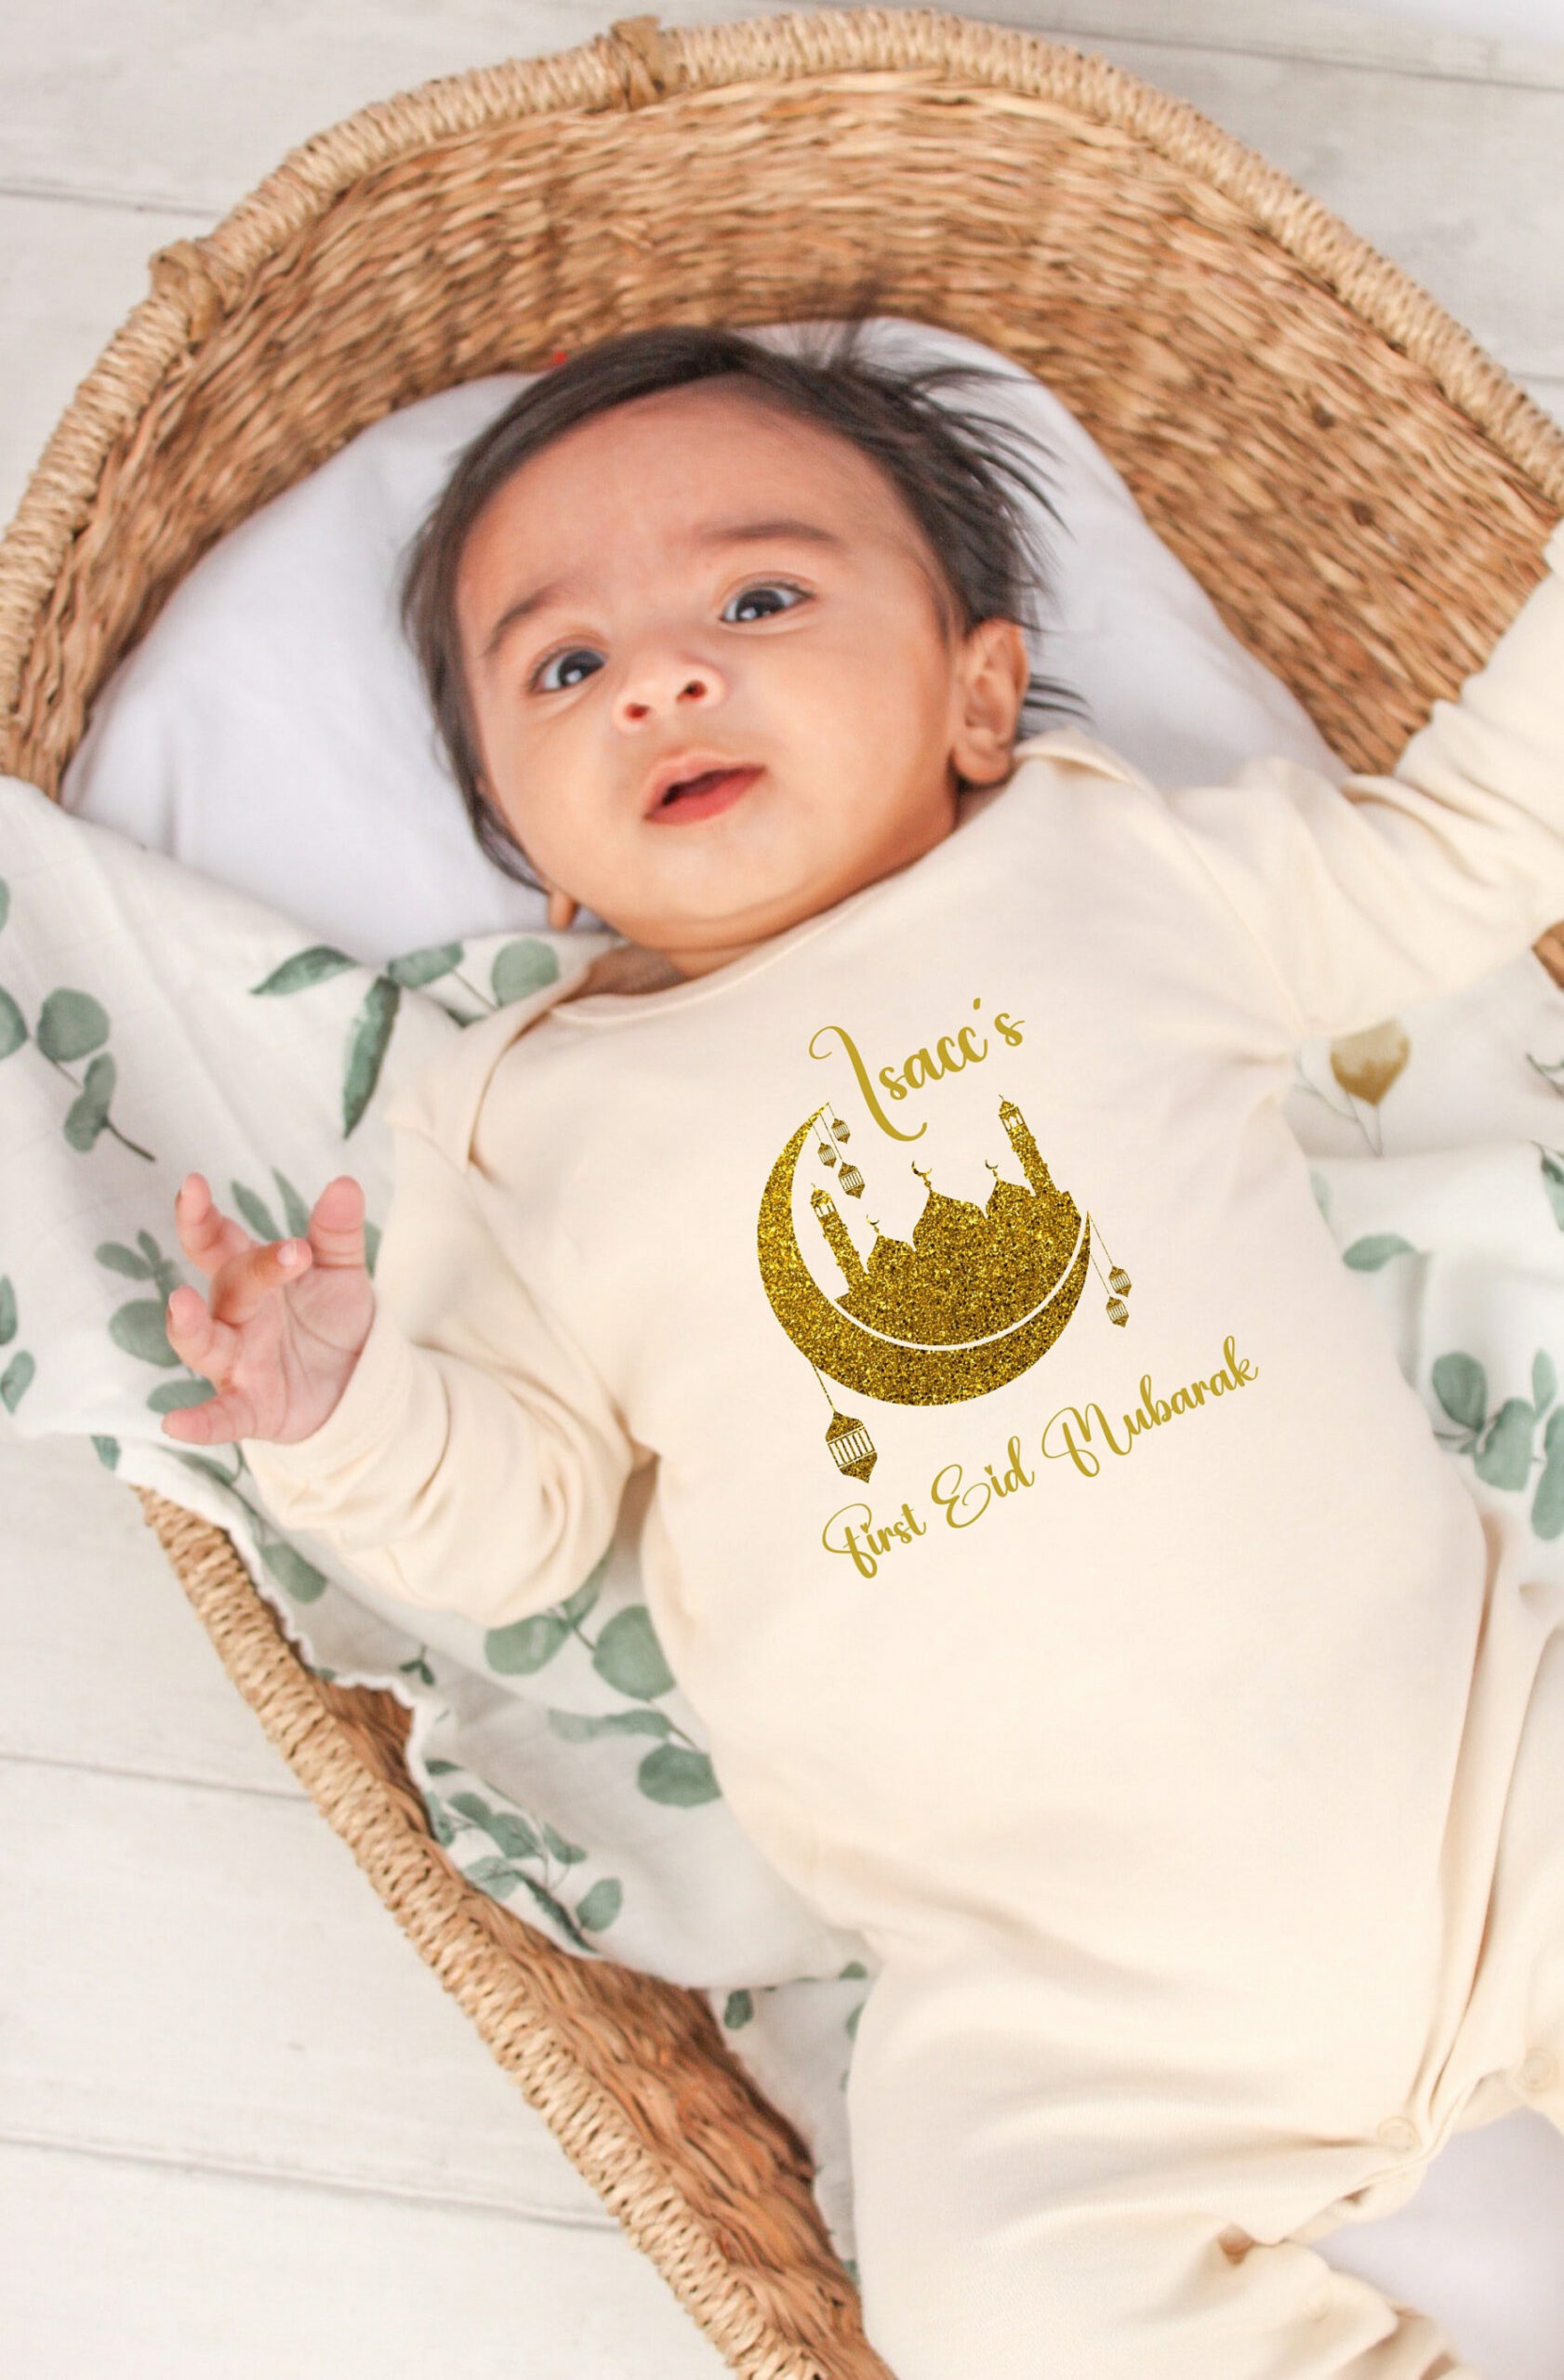 Baby eid outfit - Etsy